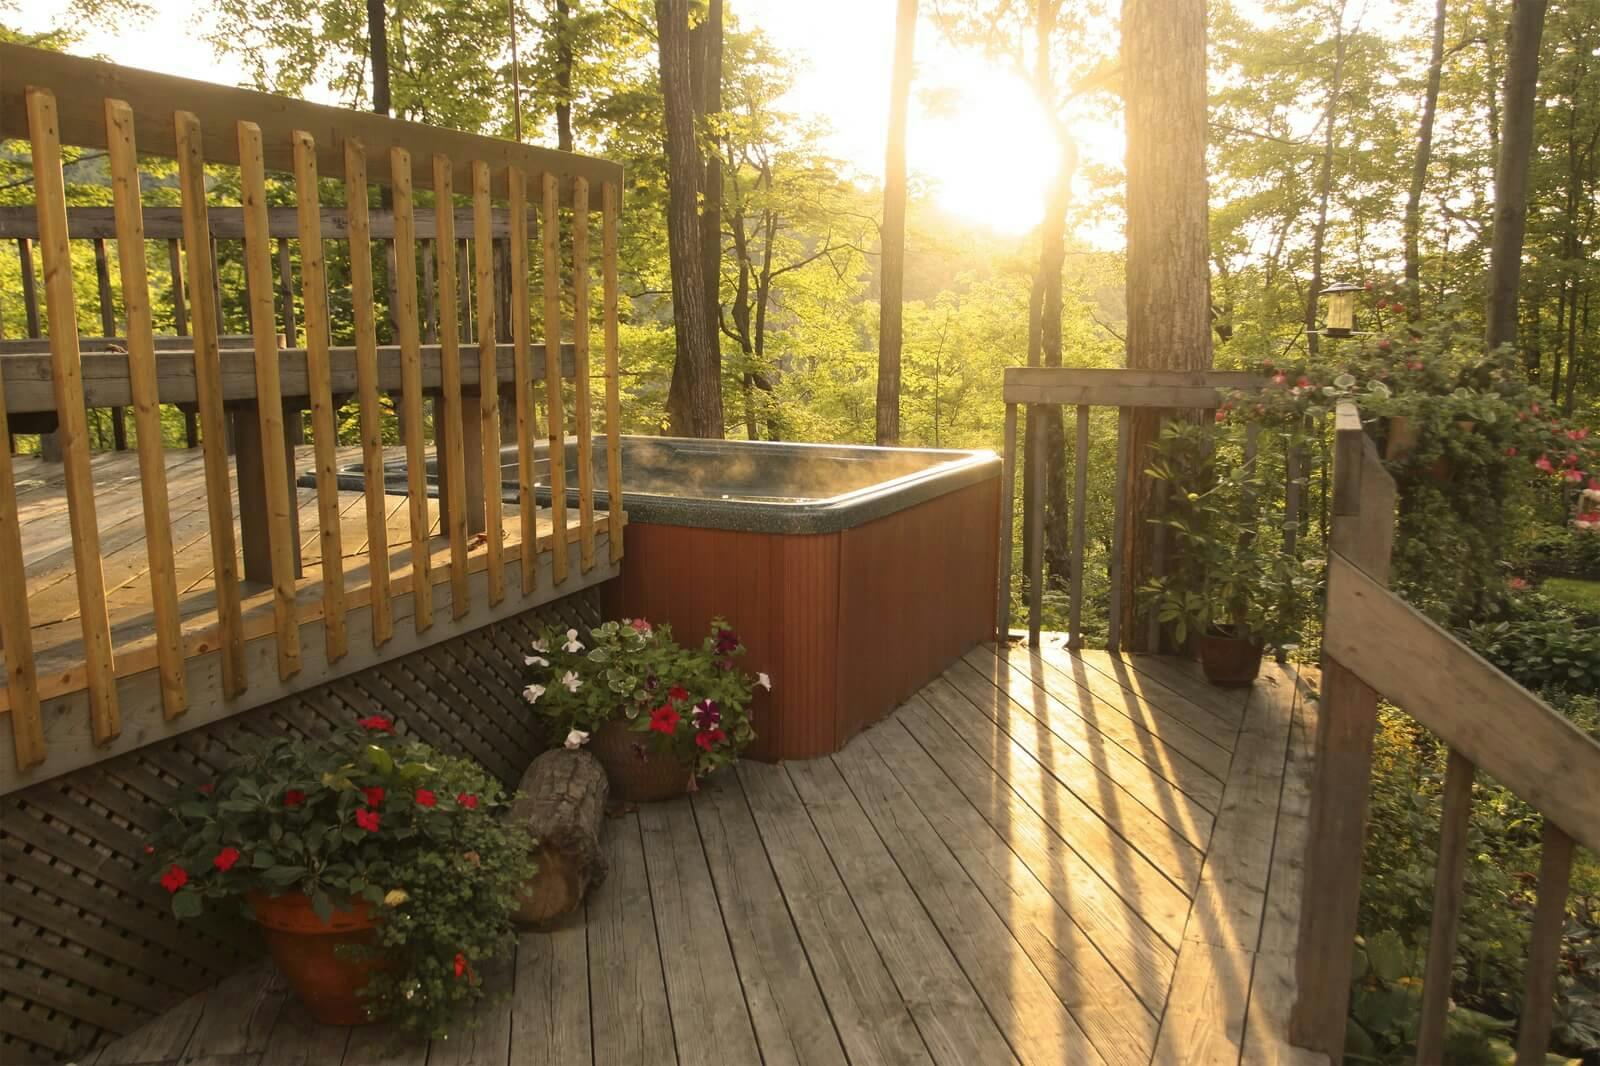 hot tub on a deck at sunset